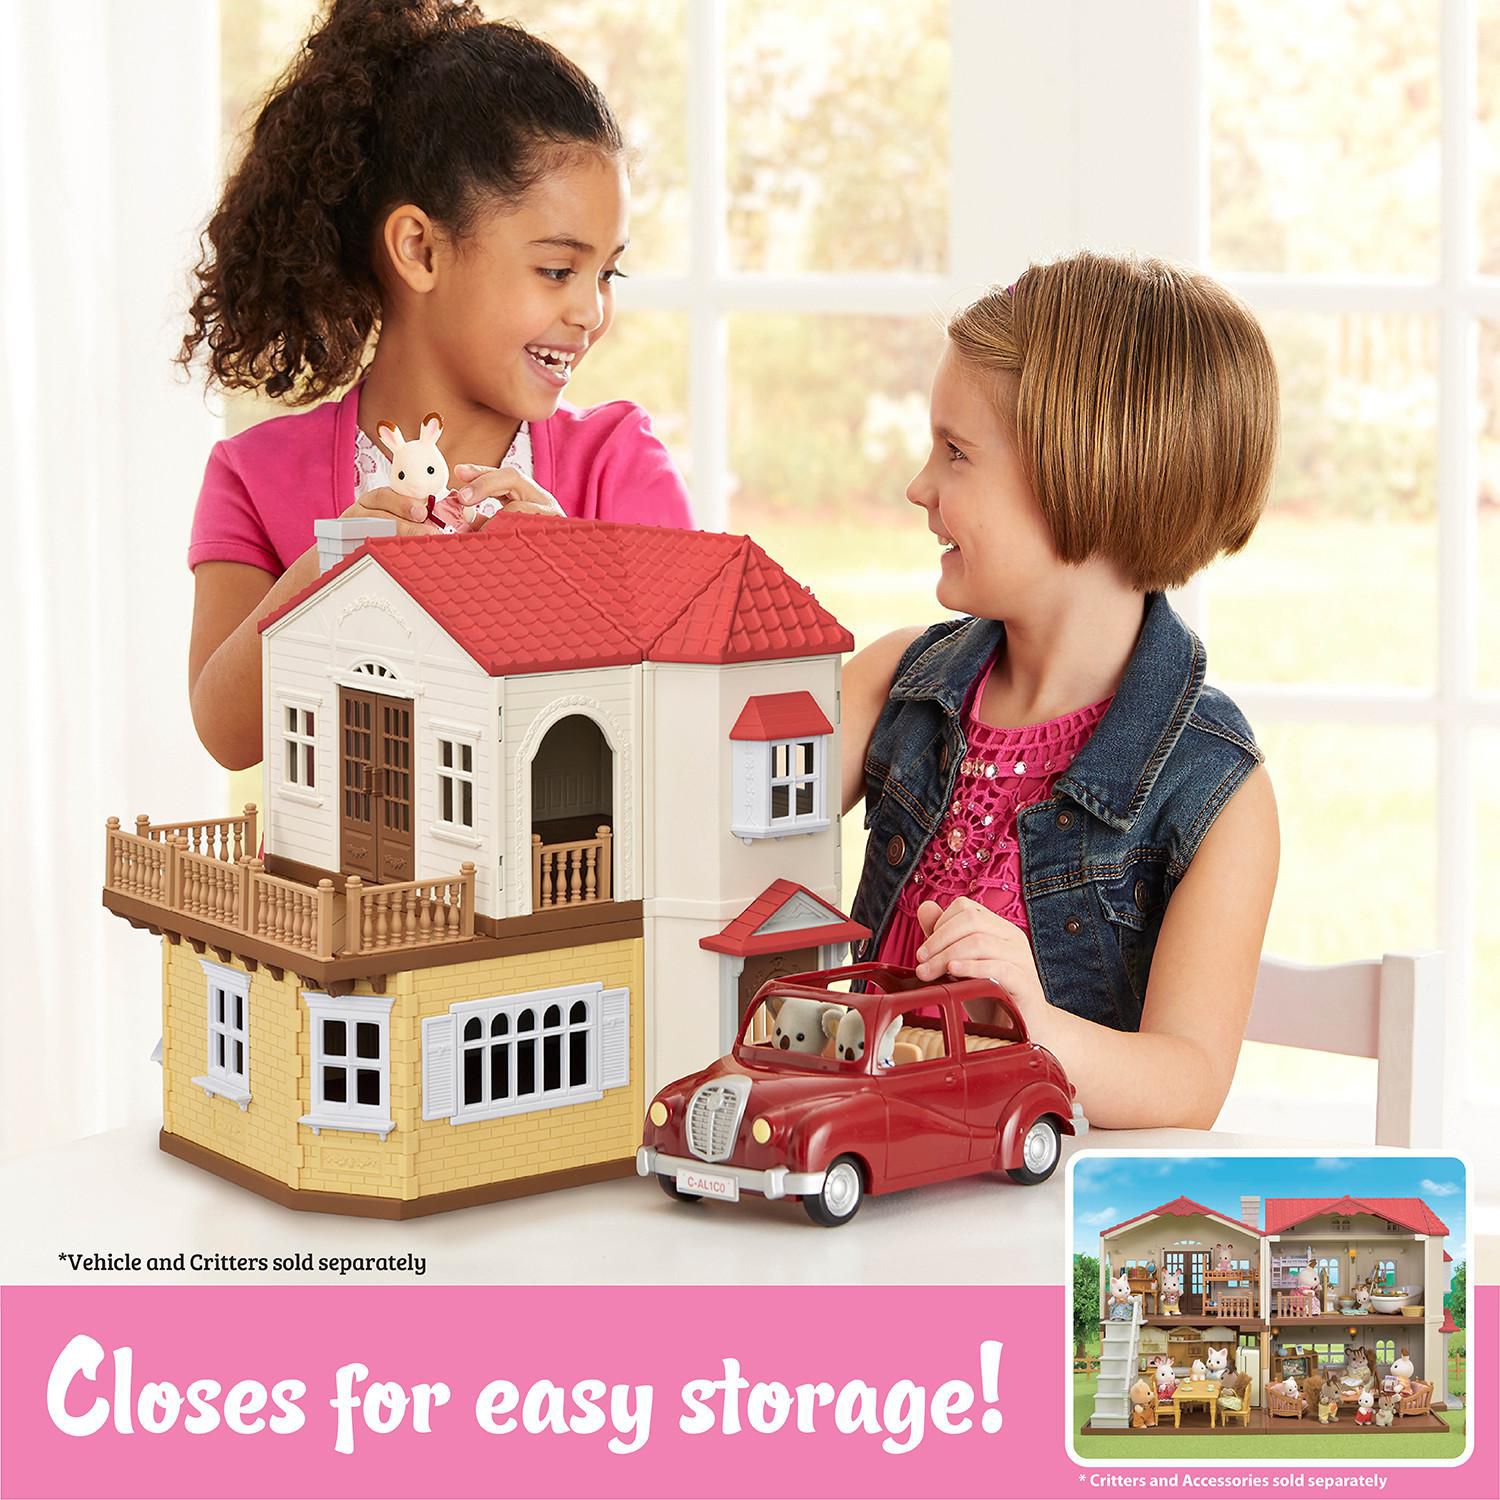 Calico Critters Red Roof Country Home, Dollhouse Playset - Walmart.ca